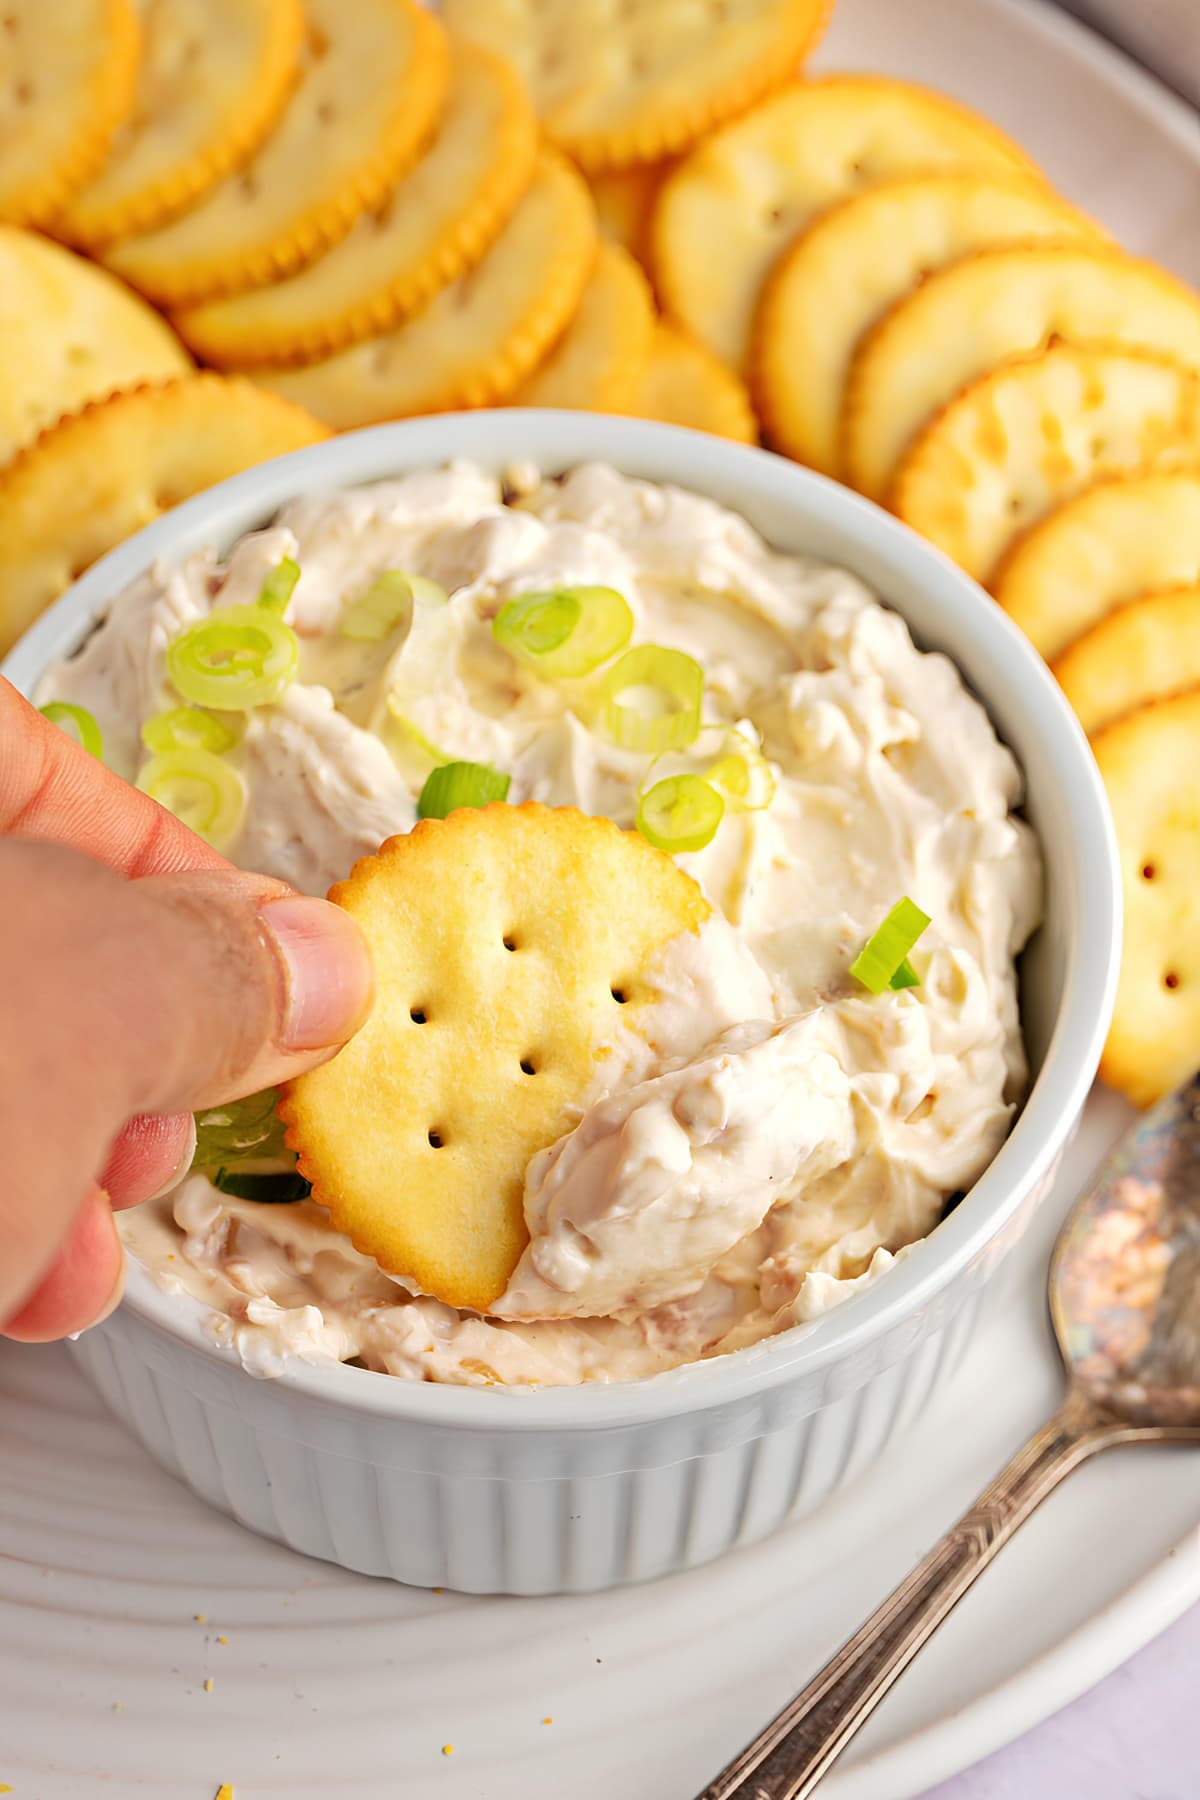 Dipping Biscuits into a Bowl of Clam Dip